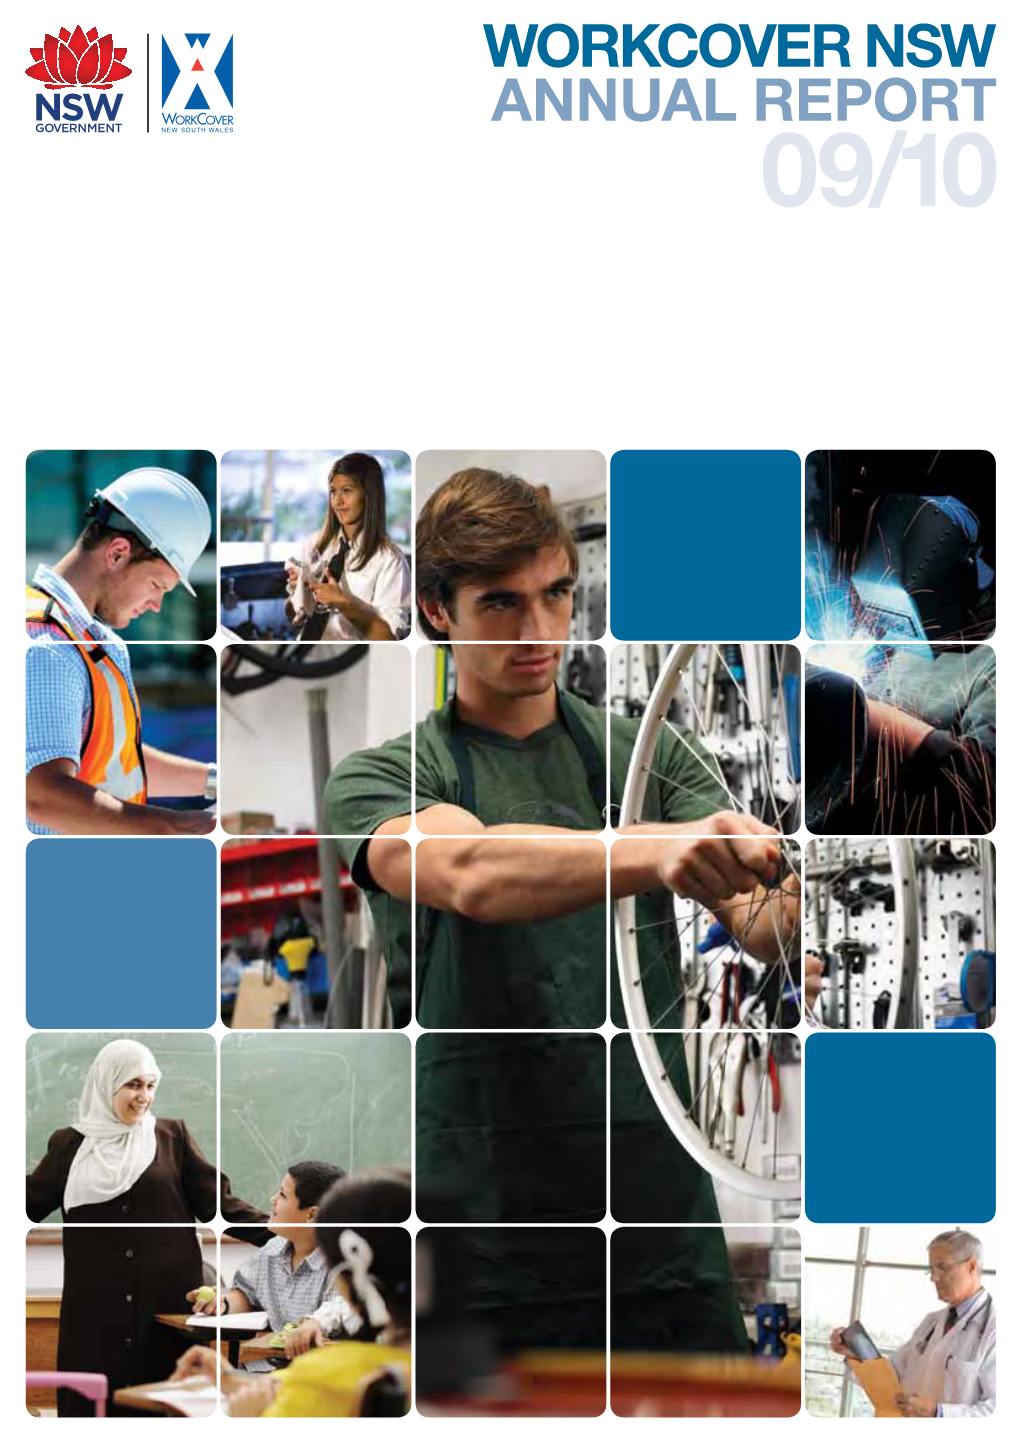 Workcover Annual Report 2009/10